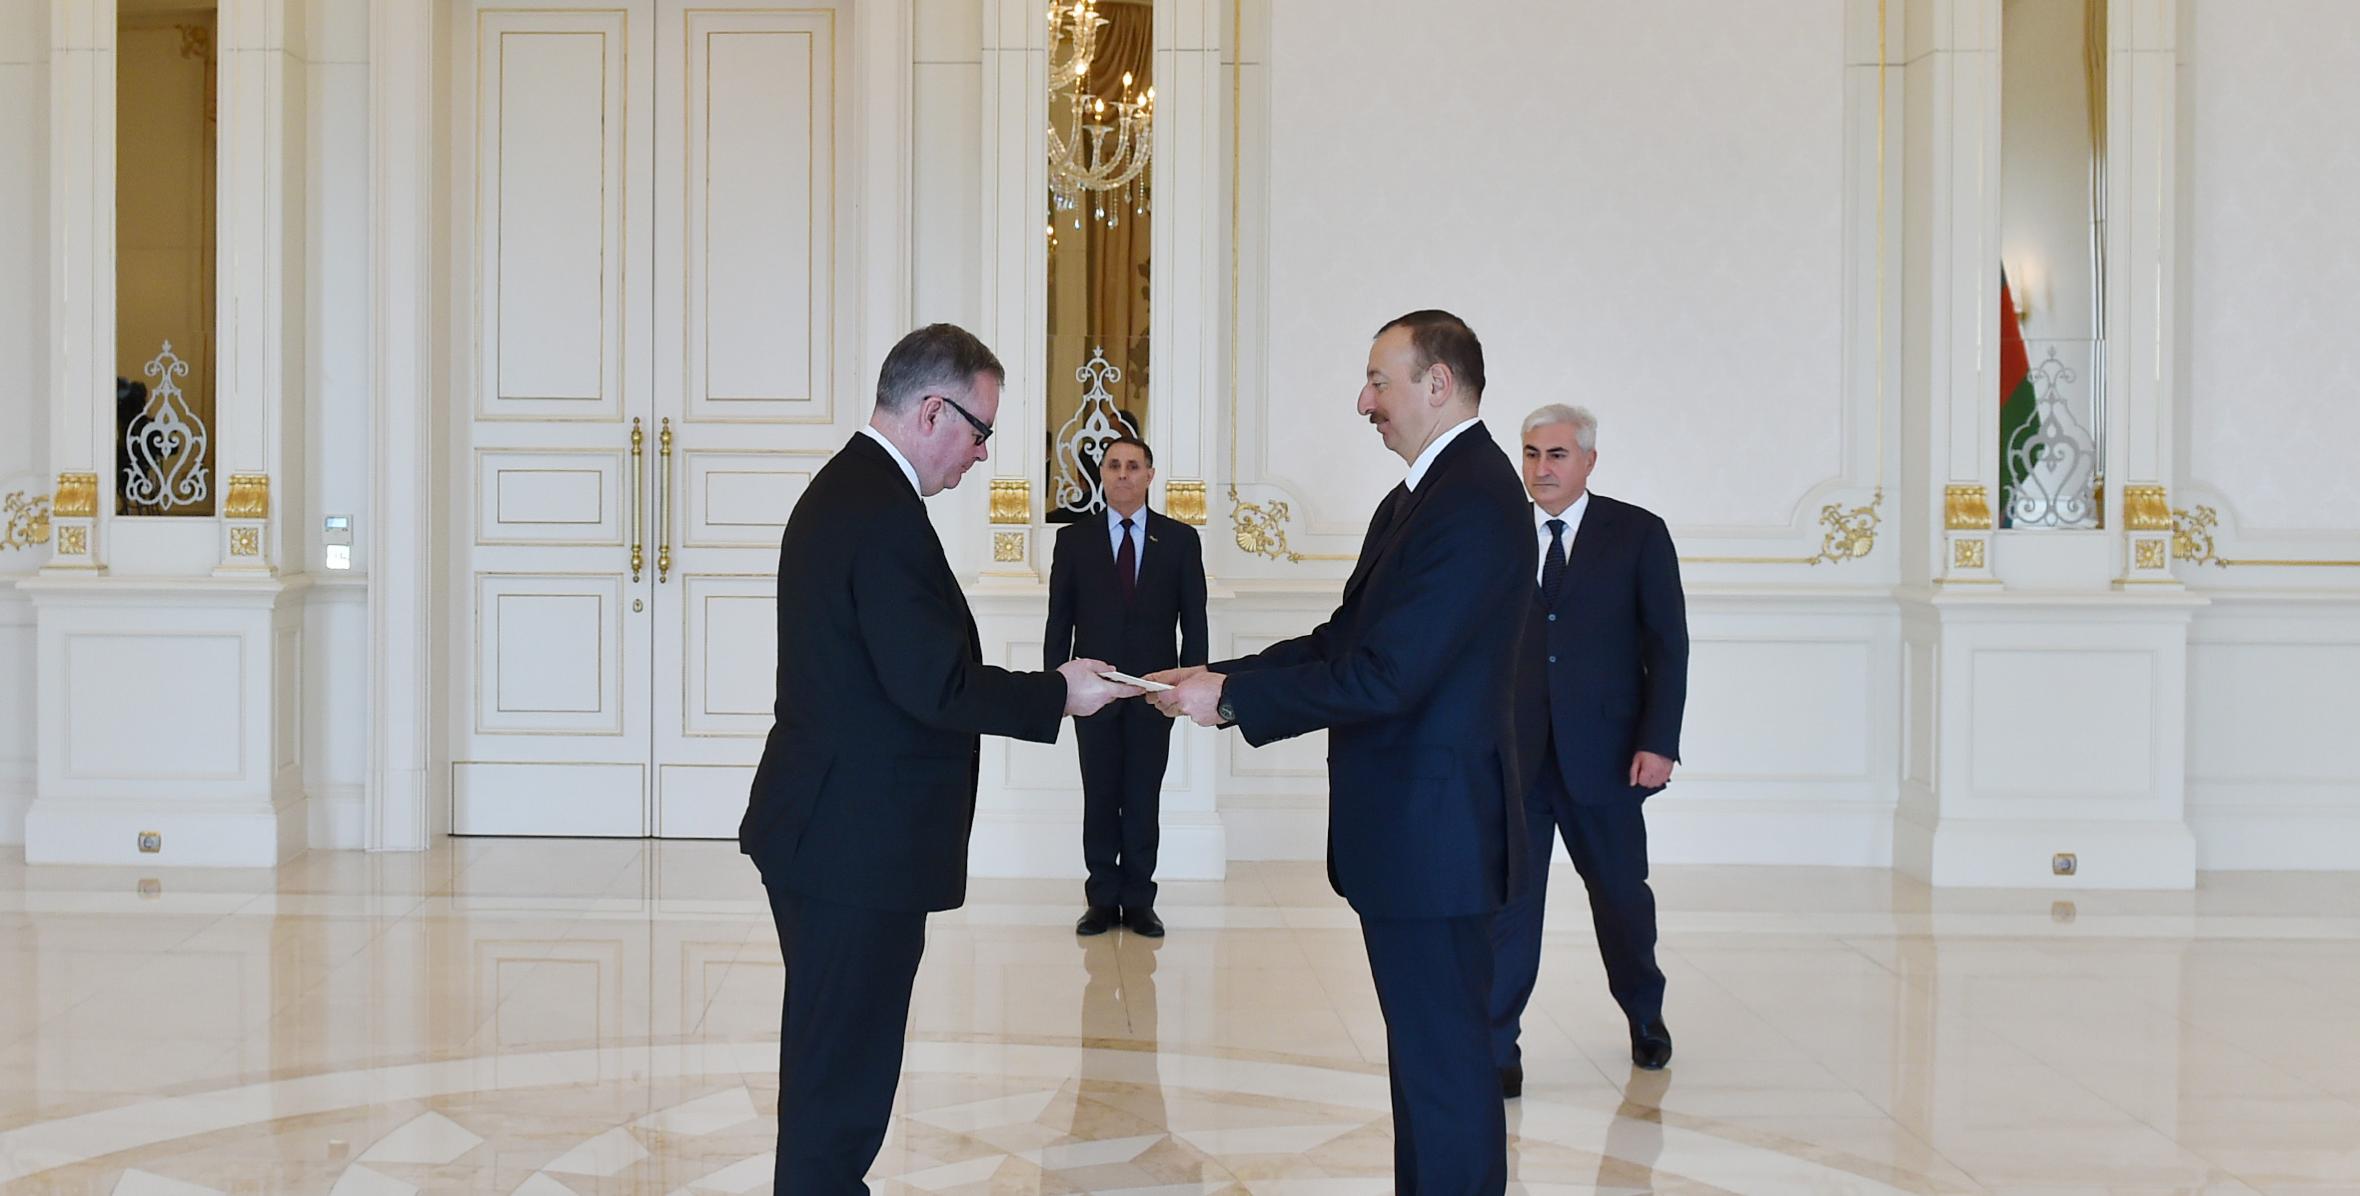 Ilham Aliyev received the credentials of the newly-appointed Ambassador of Ireland